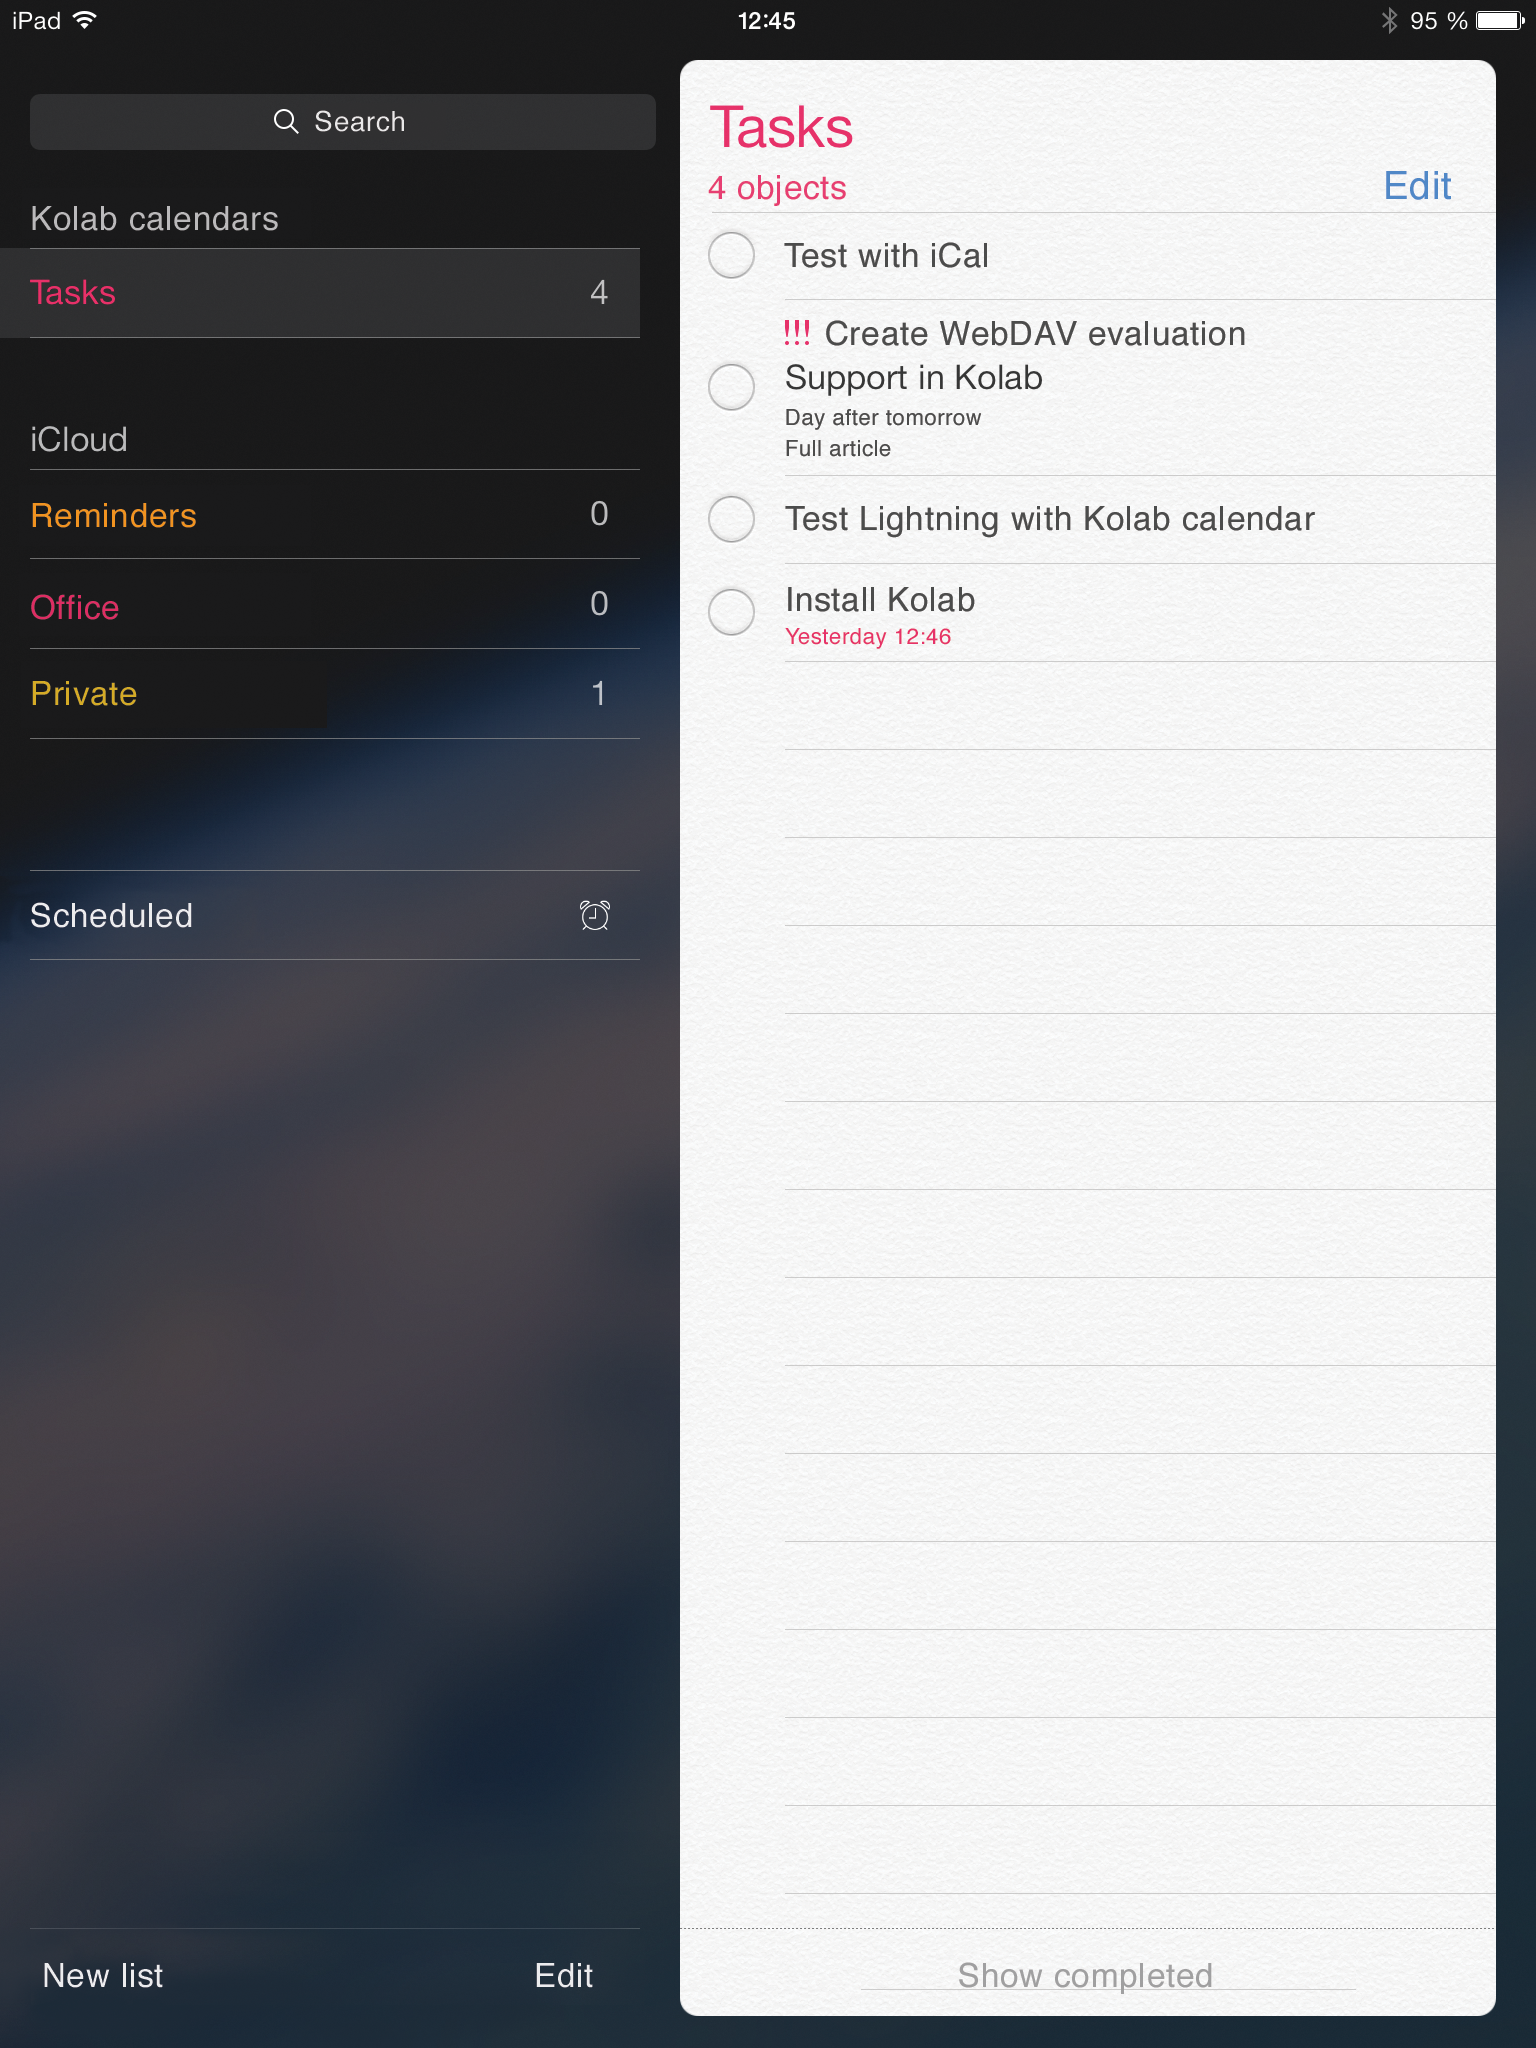 The iPhone Reminders app syncs all tasks with the Kolab server upon request. 